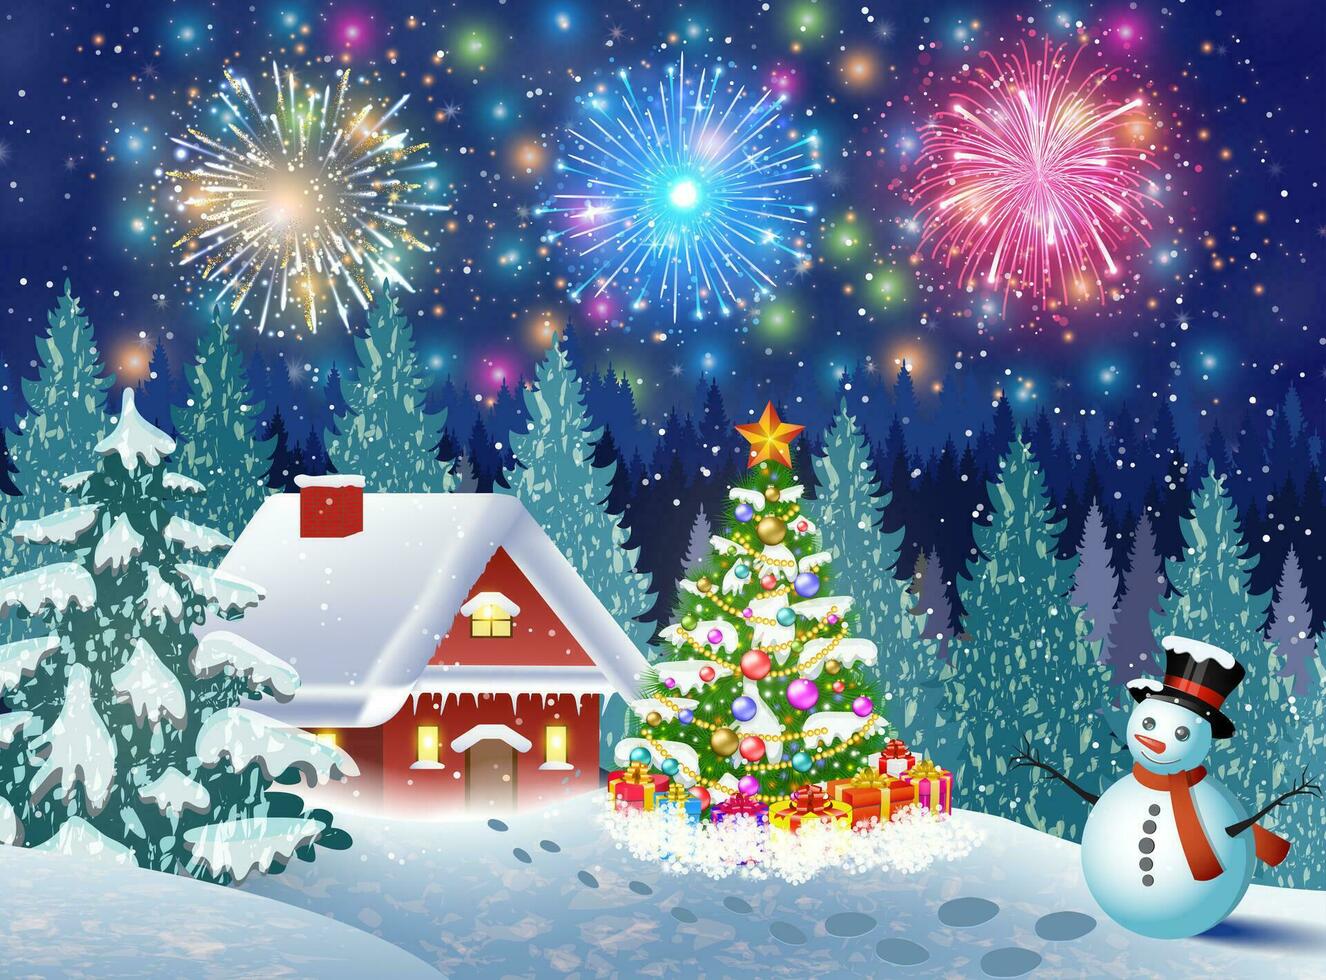 house in snowy Christmas landscape at night vector